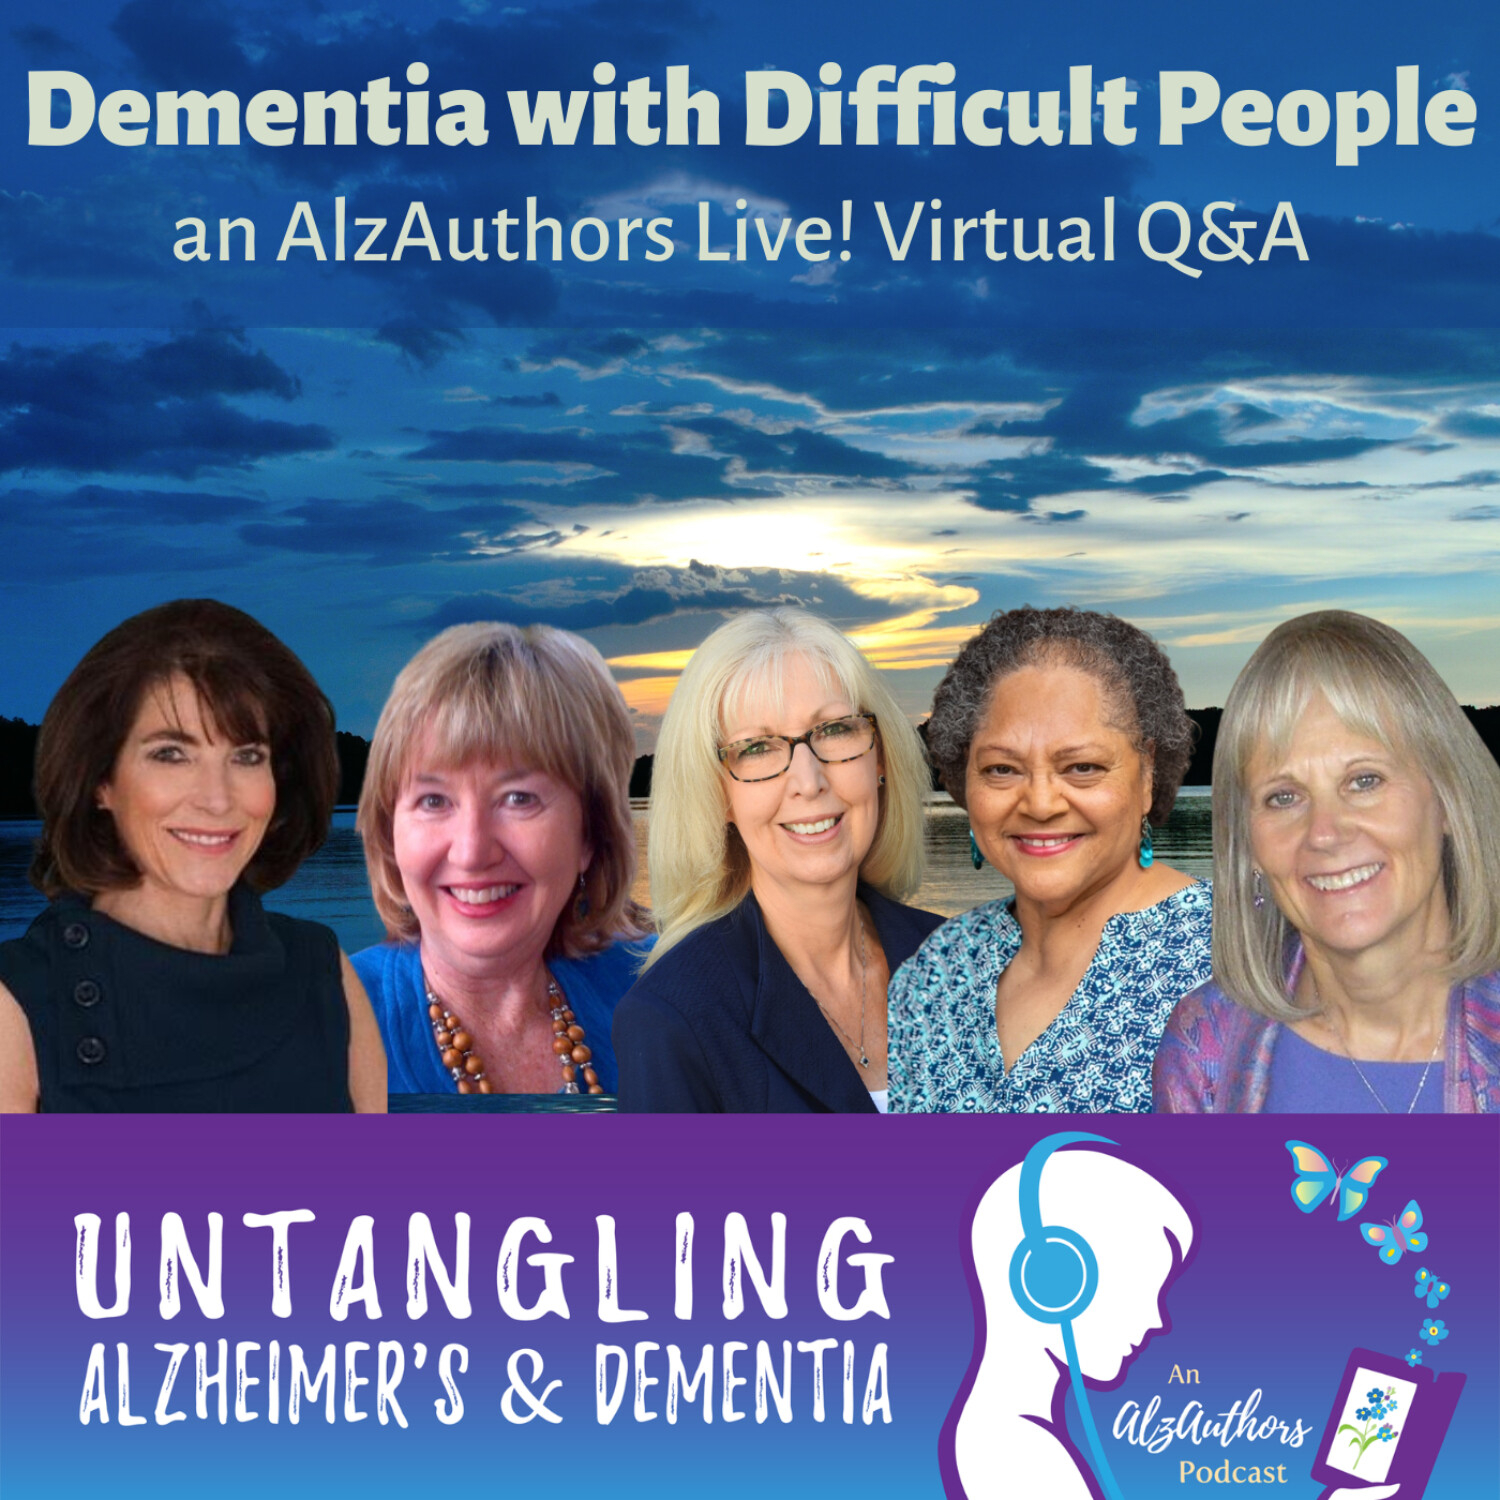 AlzAuthors Untangles Dementia with Difficult People